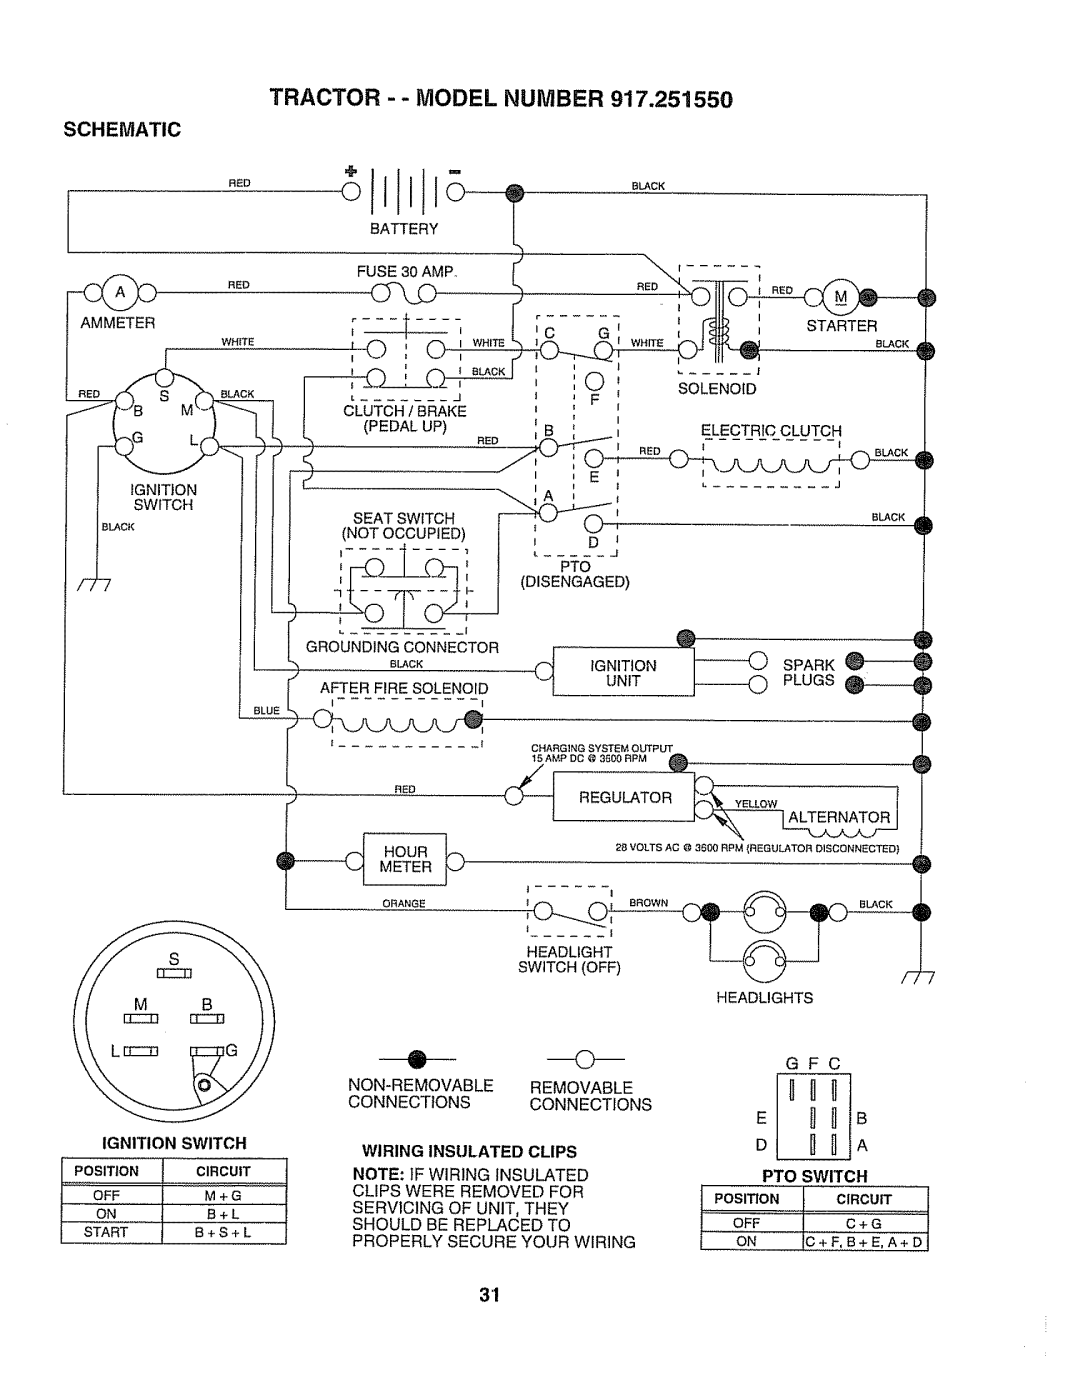 Craftsman 917O251550 owner manual C> ,w.,_, Schematic, Wiring Insulated Clips, Note: If Wiring Insulated 